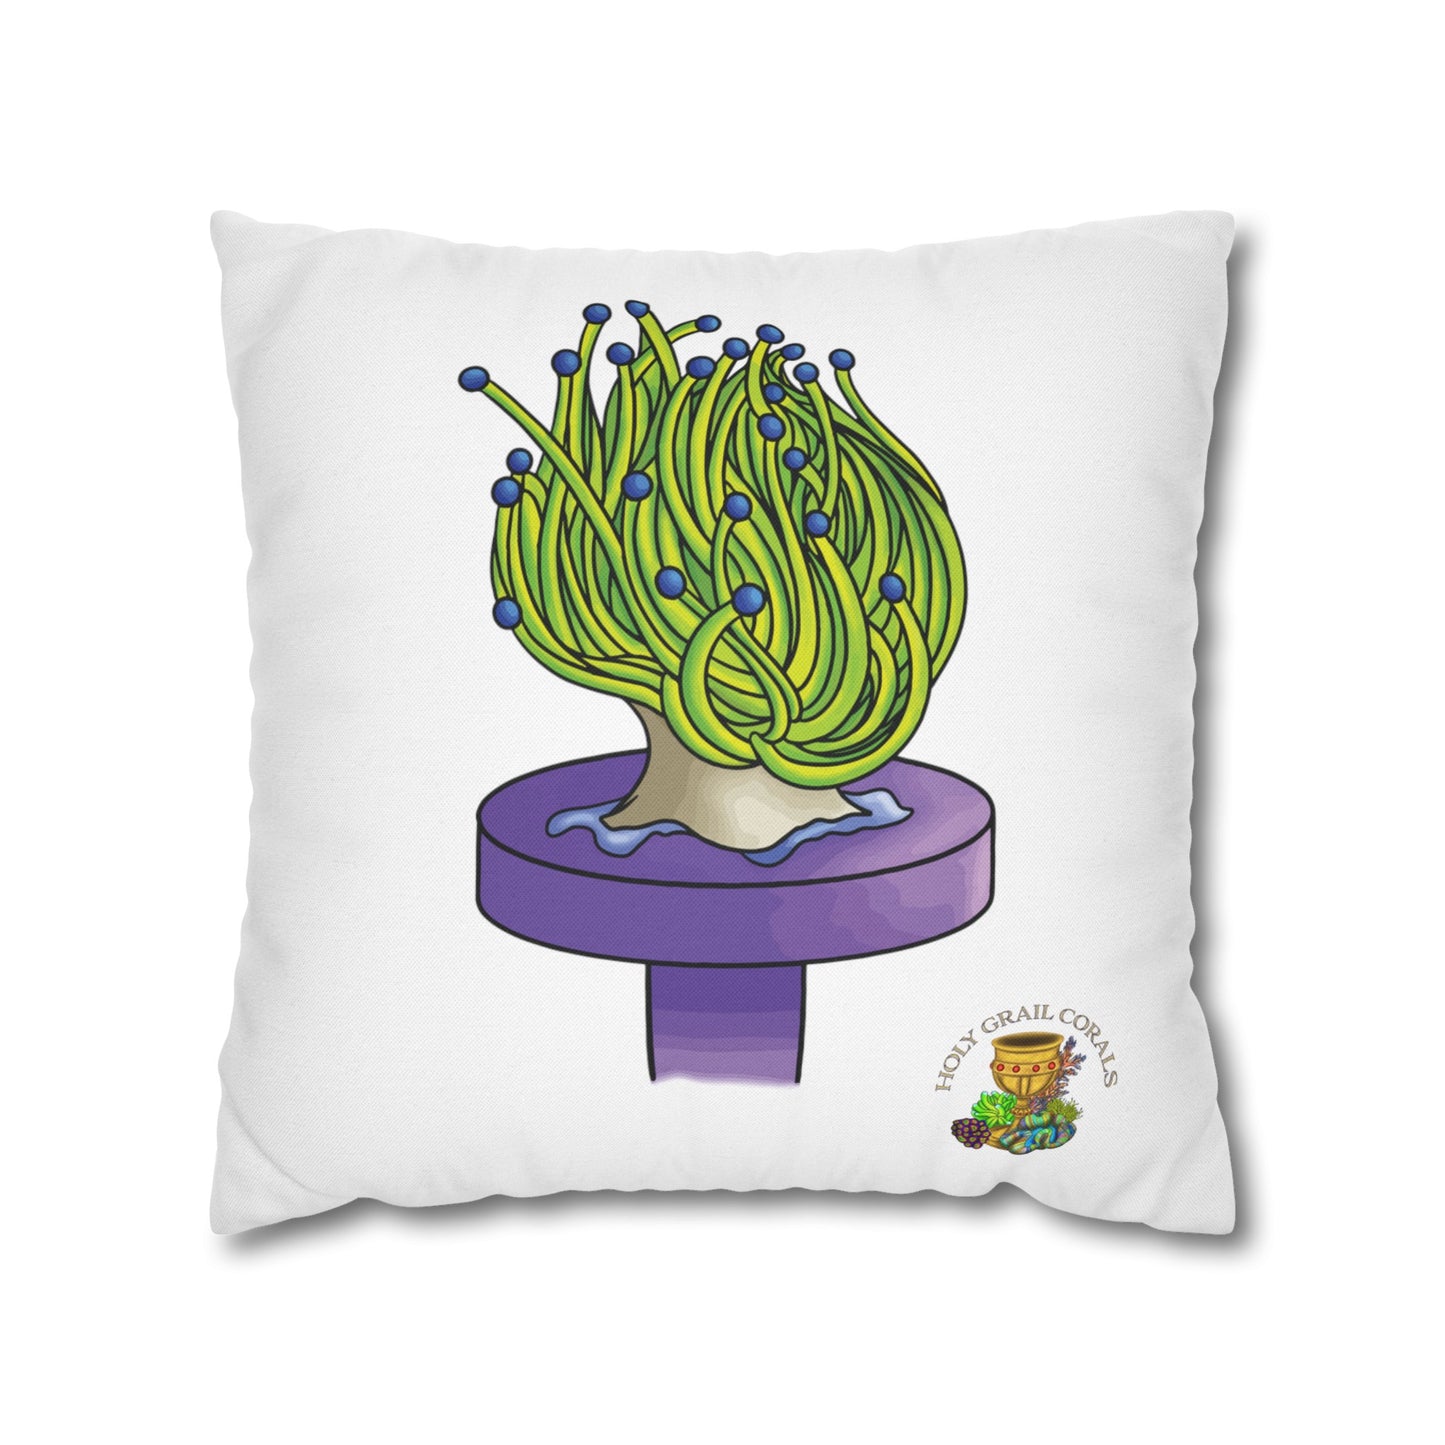 Torch Coral Square Pillow Cover